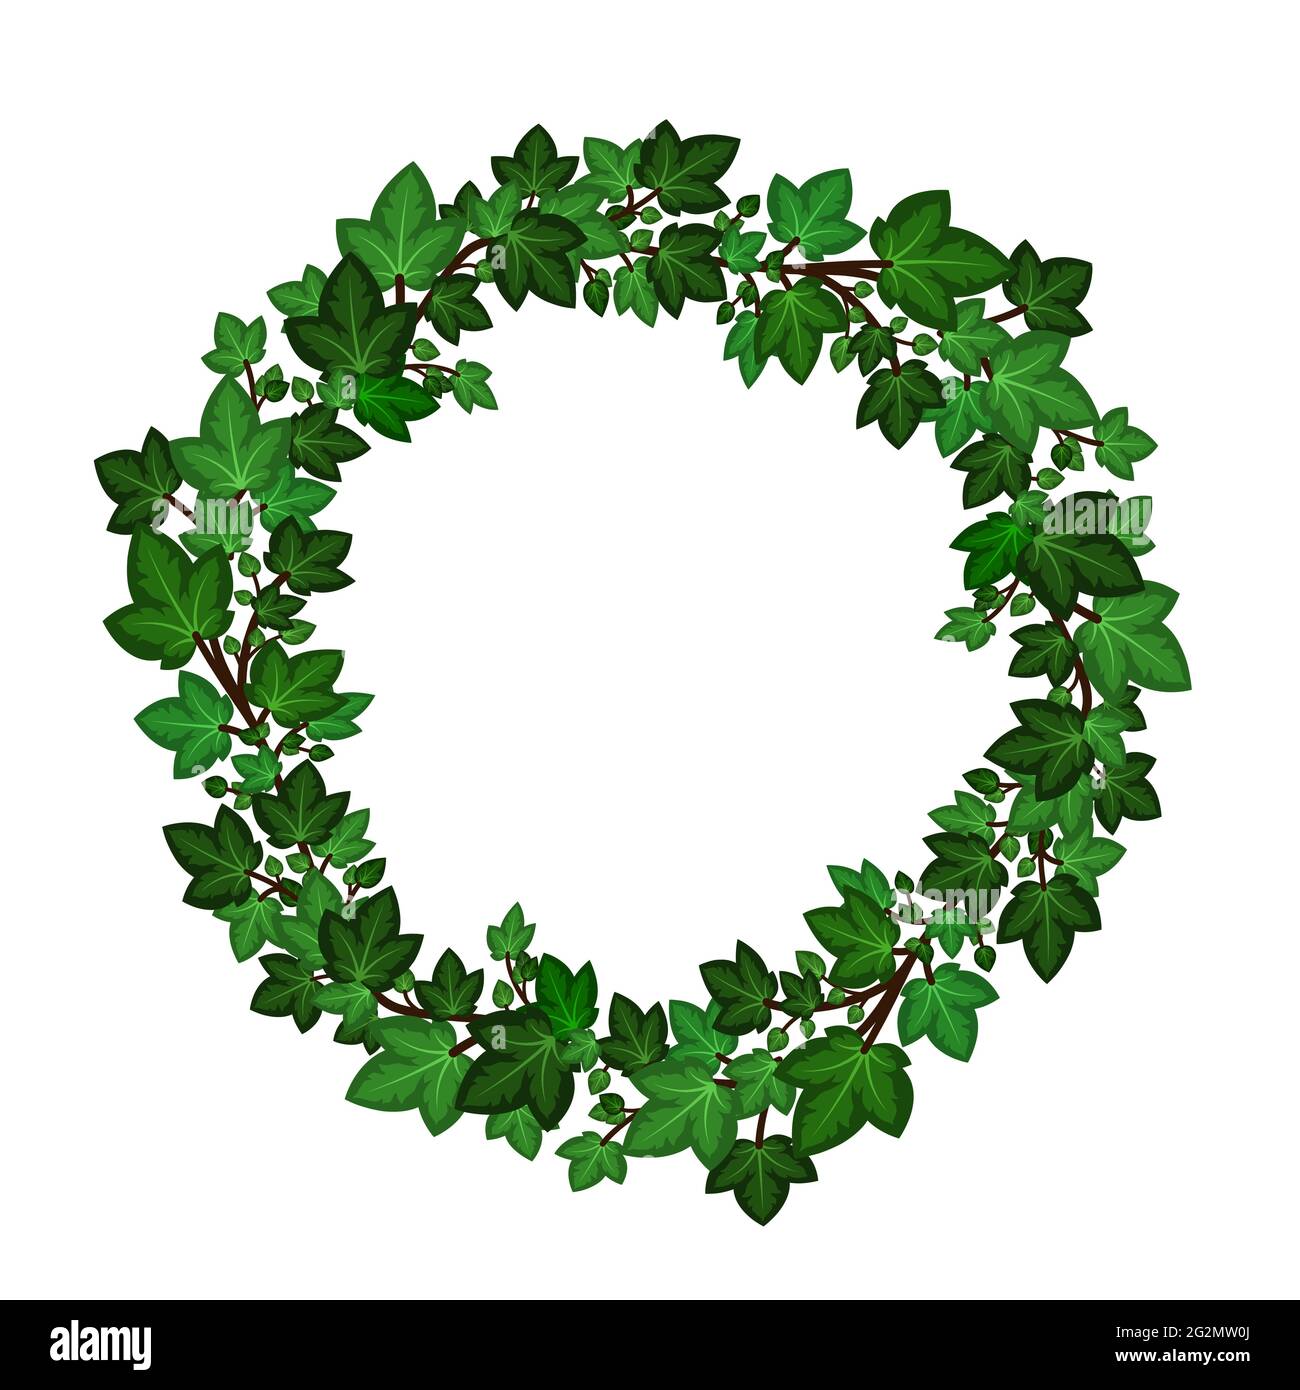 Ivy leaves wreath. Circular green ivy garland isolated on white background. Decorative frme border. Vector illustration Stock Vector